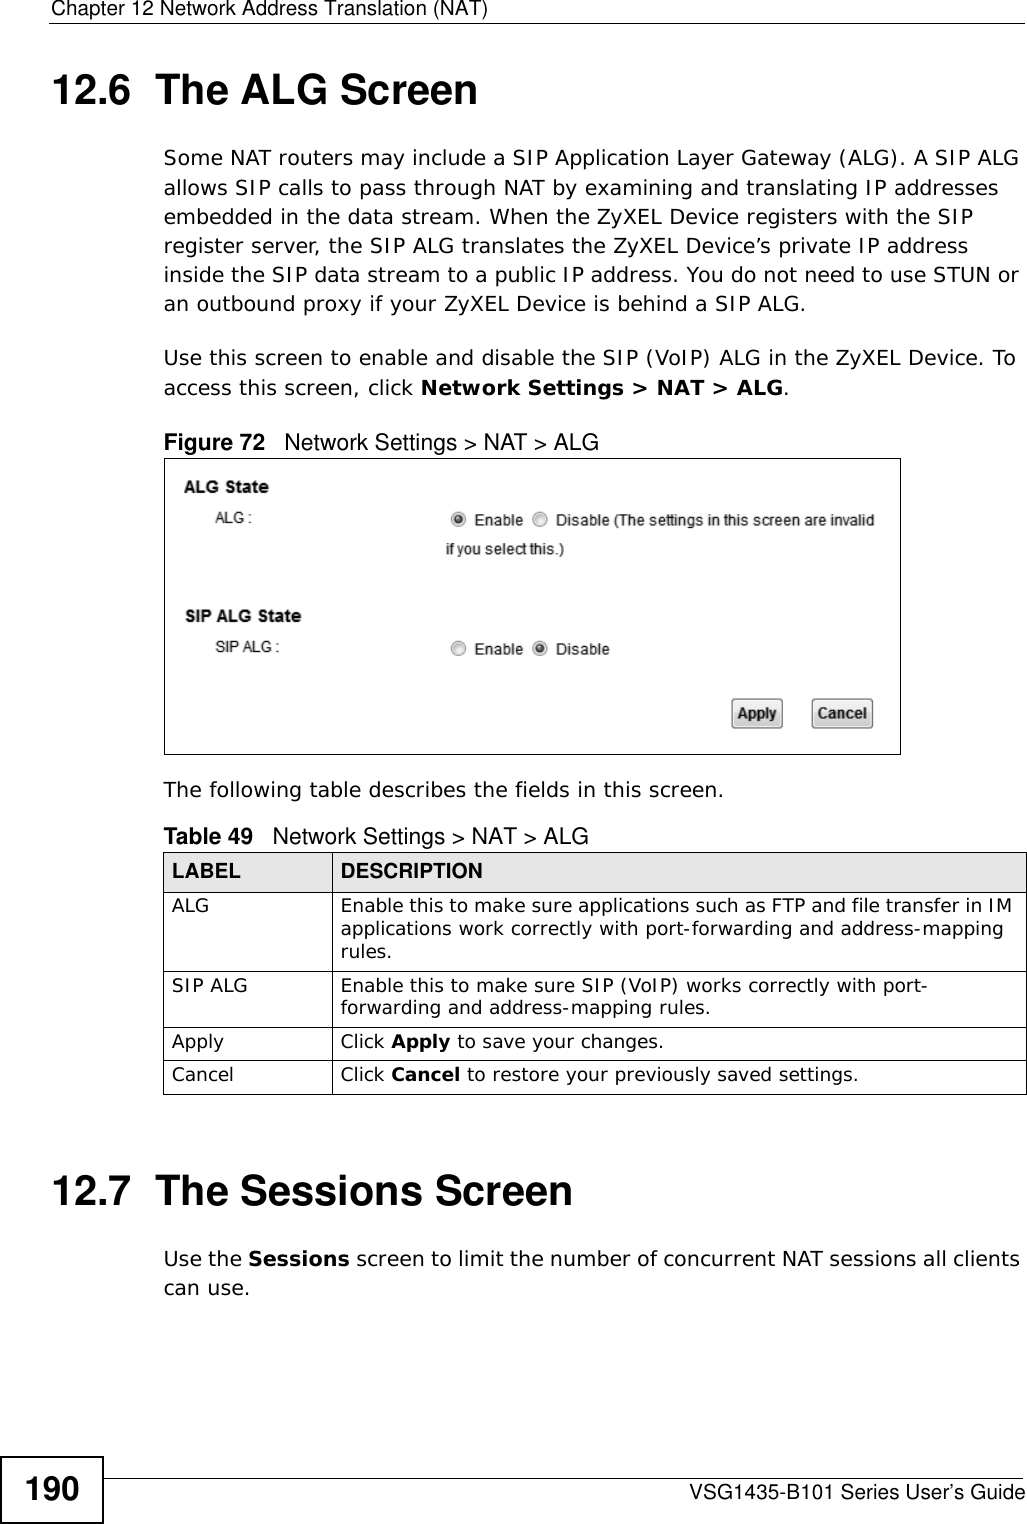 Chapter 12 Network Address Translation (NAT)VSG1435-B101 Series User’s Guide19012.6  The ALG ScreenSome NAT routers may include a SIP Application Layer Gateway (ALG). A SIP ALG allows SIP calls to pass through NAT by examining and translating IP addresses embedded in the data stream. When the ZyXEL Device registers with the SIP register server, the SIP ALG translates the ZyXEL Device’s private IP address inside the SIP data stream to a public IP address. You do not need to use STUN or an outbound proxy if your ZyXEL Device is behind a SIP ALG.Use this screen to enable and disable the SIP (VoIP) ALG in the ZyXEL Device. To access this screen, click Network Settings &gt; NAT &gt; ALG.Figure 72   Network Settings &gt; NAT &gt; ALGThe following table describes the fields in this screen.12.7  The Sessions ScreenUse the Sessions screen to limit the number of concurrent NAT sessions all clients can use. Table 49   Network Settings &gt; NAT &gt; ALGLABEL DESCRIPTIONALG Enable this to make sure applications such as FTP and file transfer in IM applications work correctly with port-forwarding and address-mapping rules.SIP ALG Enable this to make sure SIP (VoIP) works correctly with port-forwarding and address-mapping rules.Apply Click Apply to save your changes.Cancel Click Cancel to restore your previously saved settings.